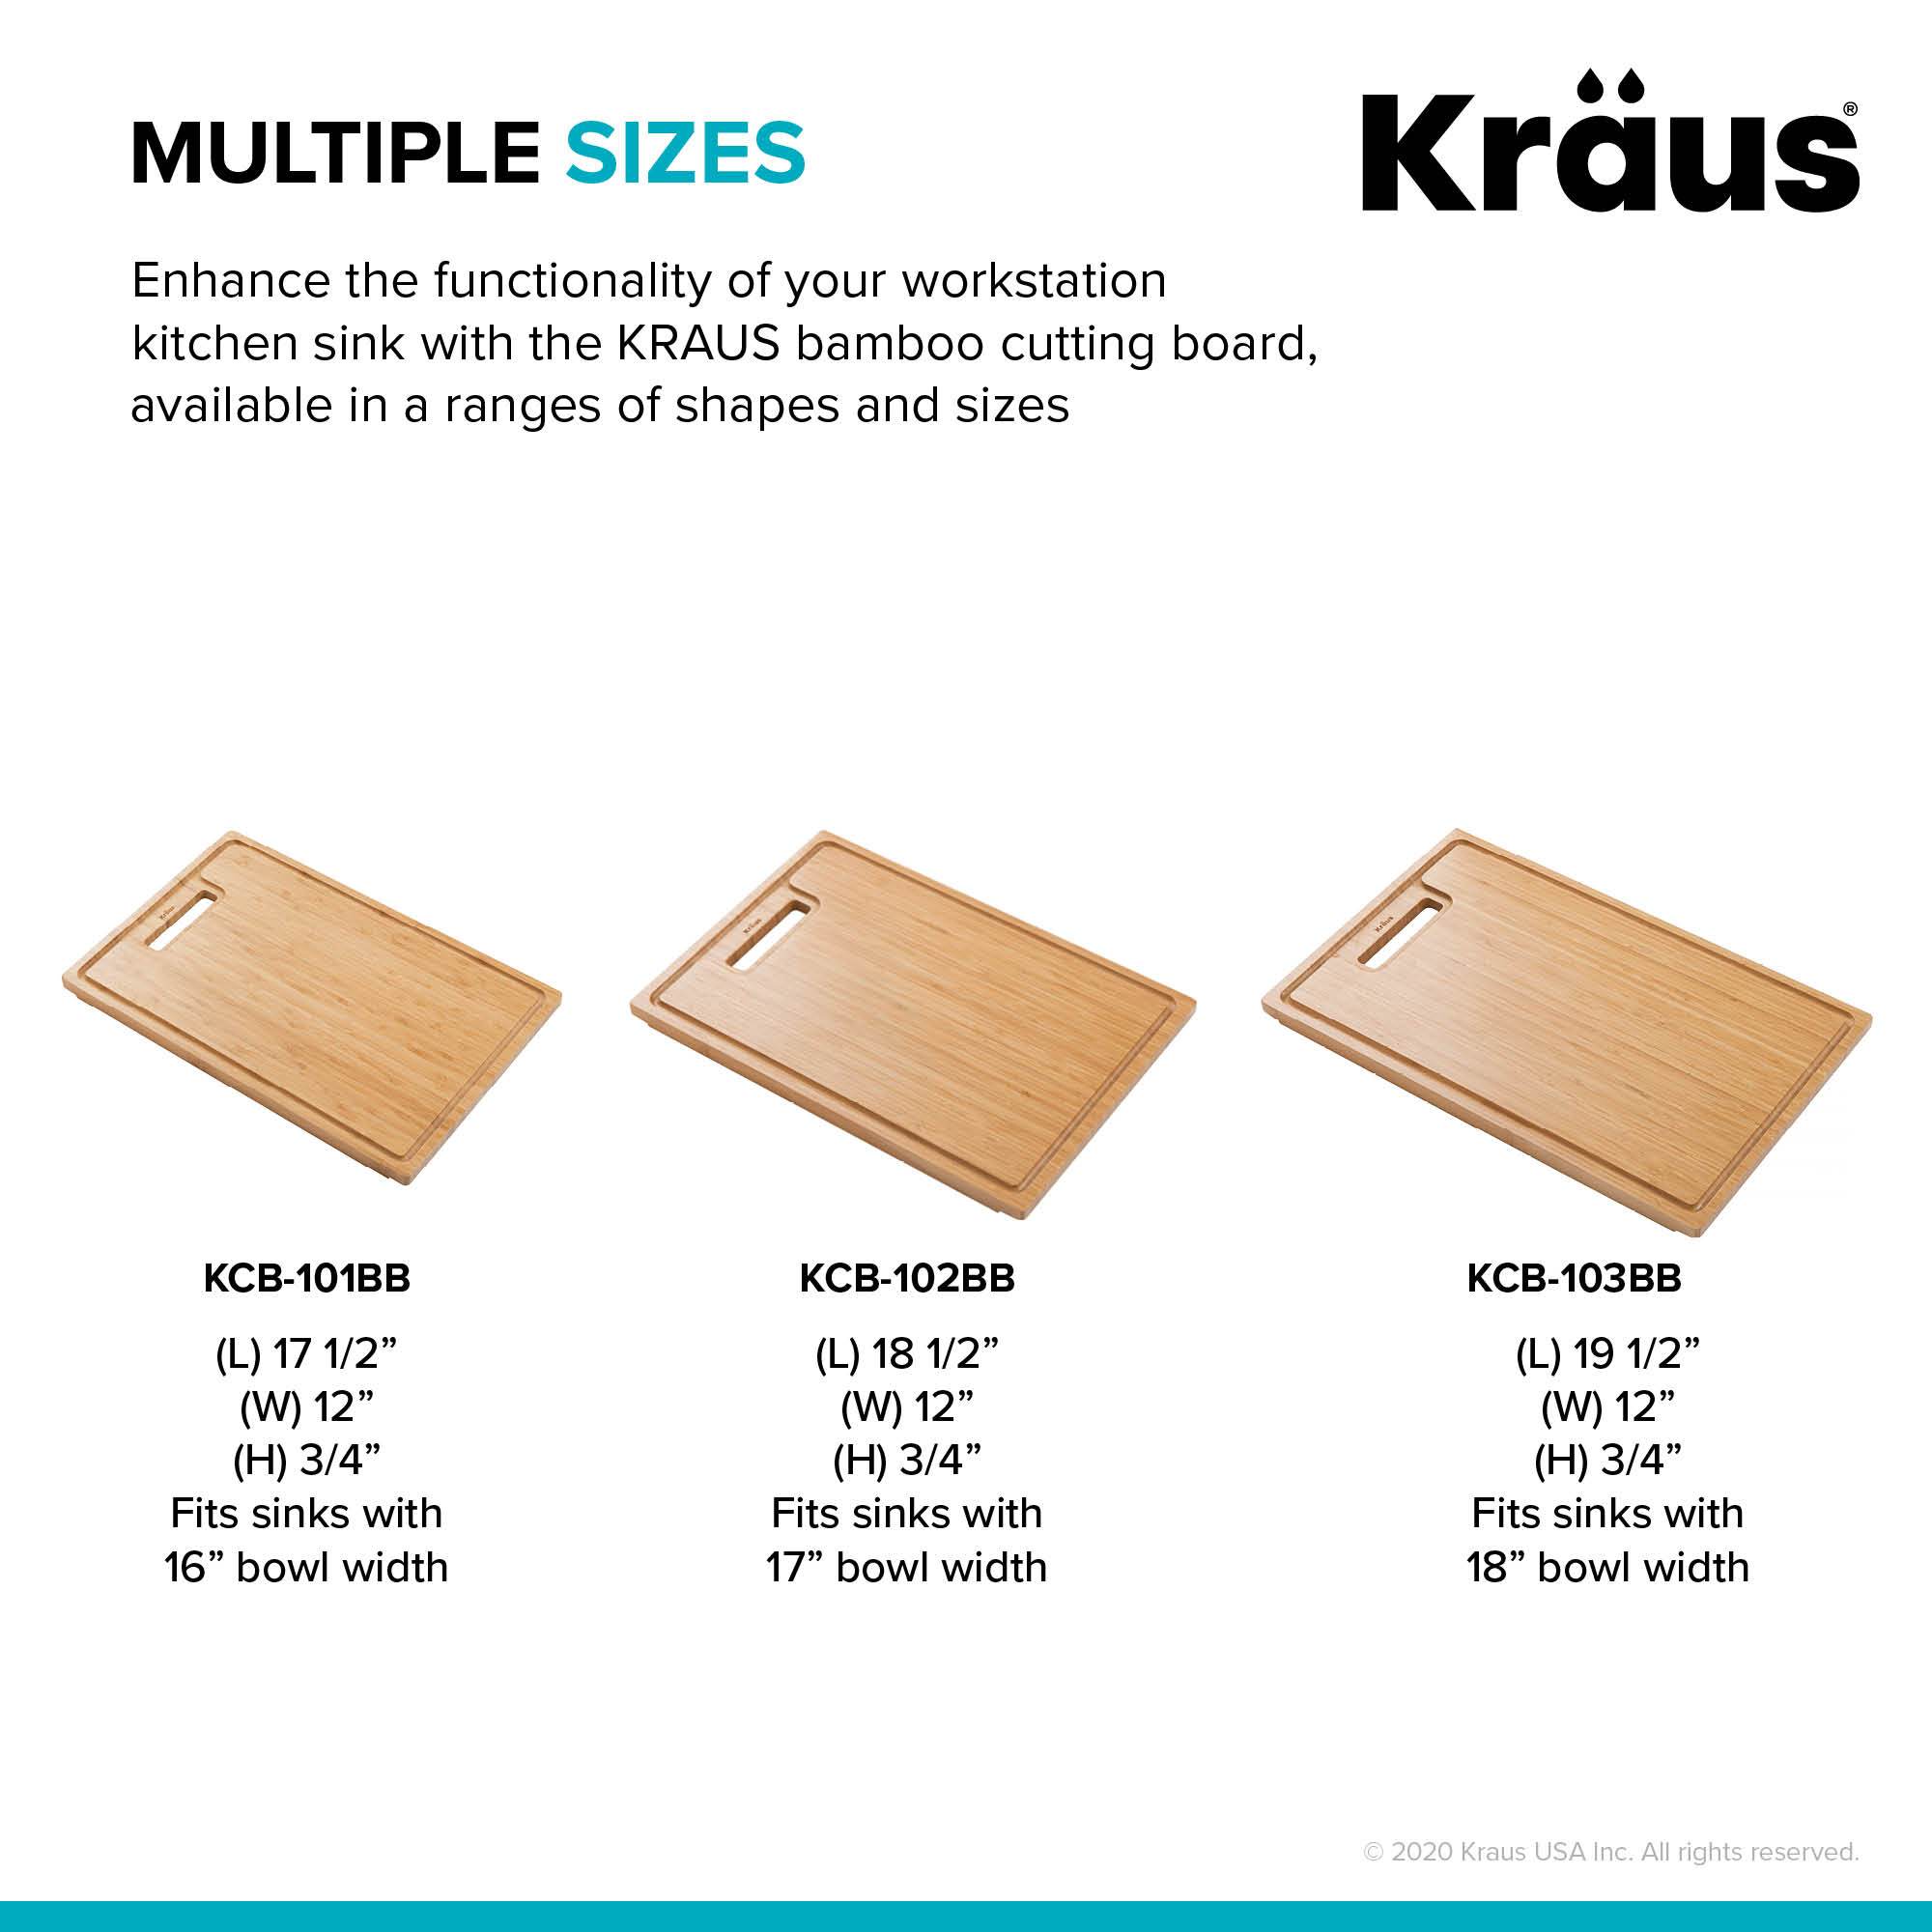 Kraus KCBT-103BB 19.5 x 12 in. Solid Bamboo Cutting Board with Mobile Device Holder for Standard Kitchen Sink or Countertop